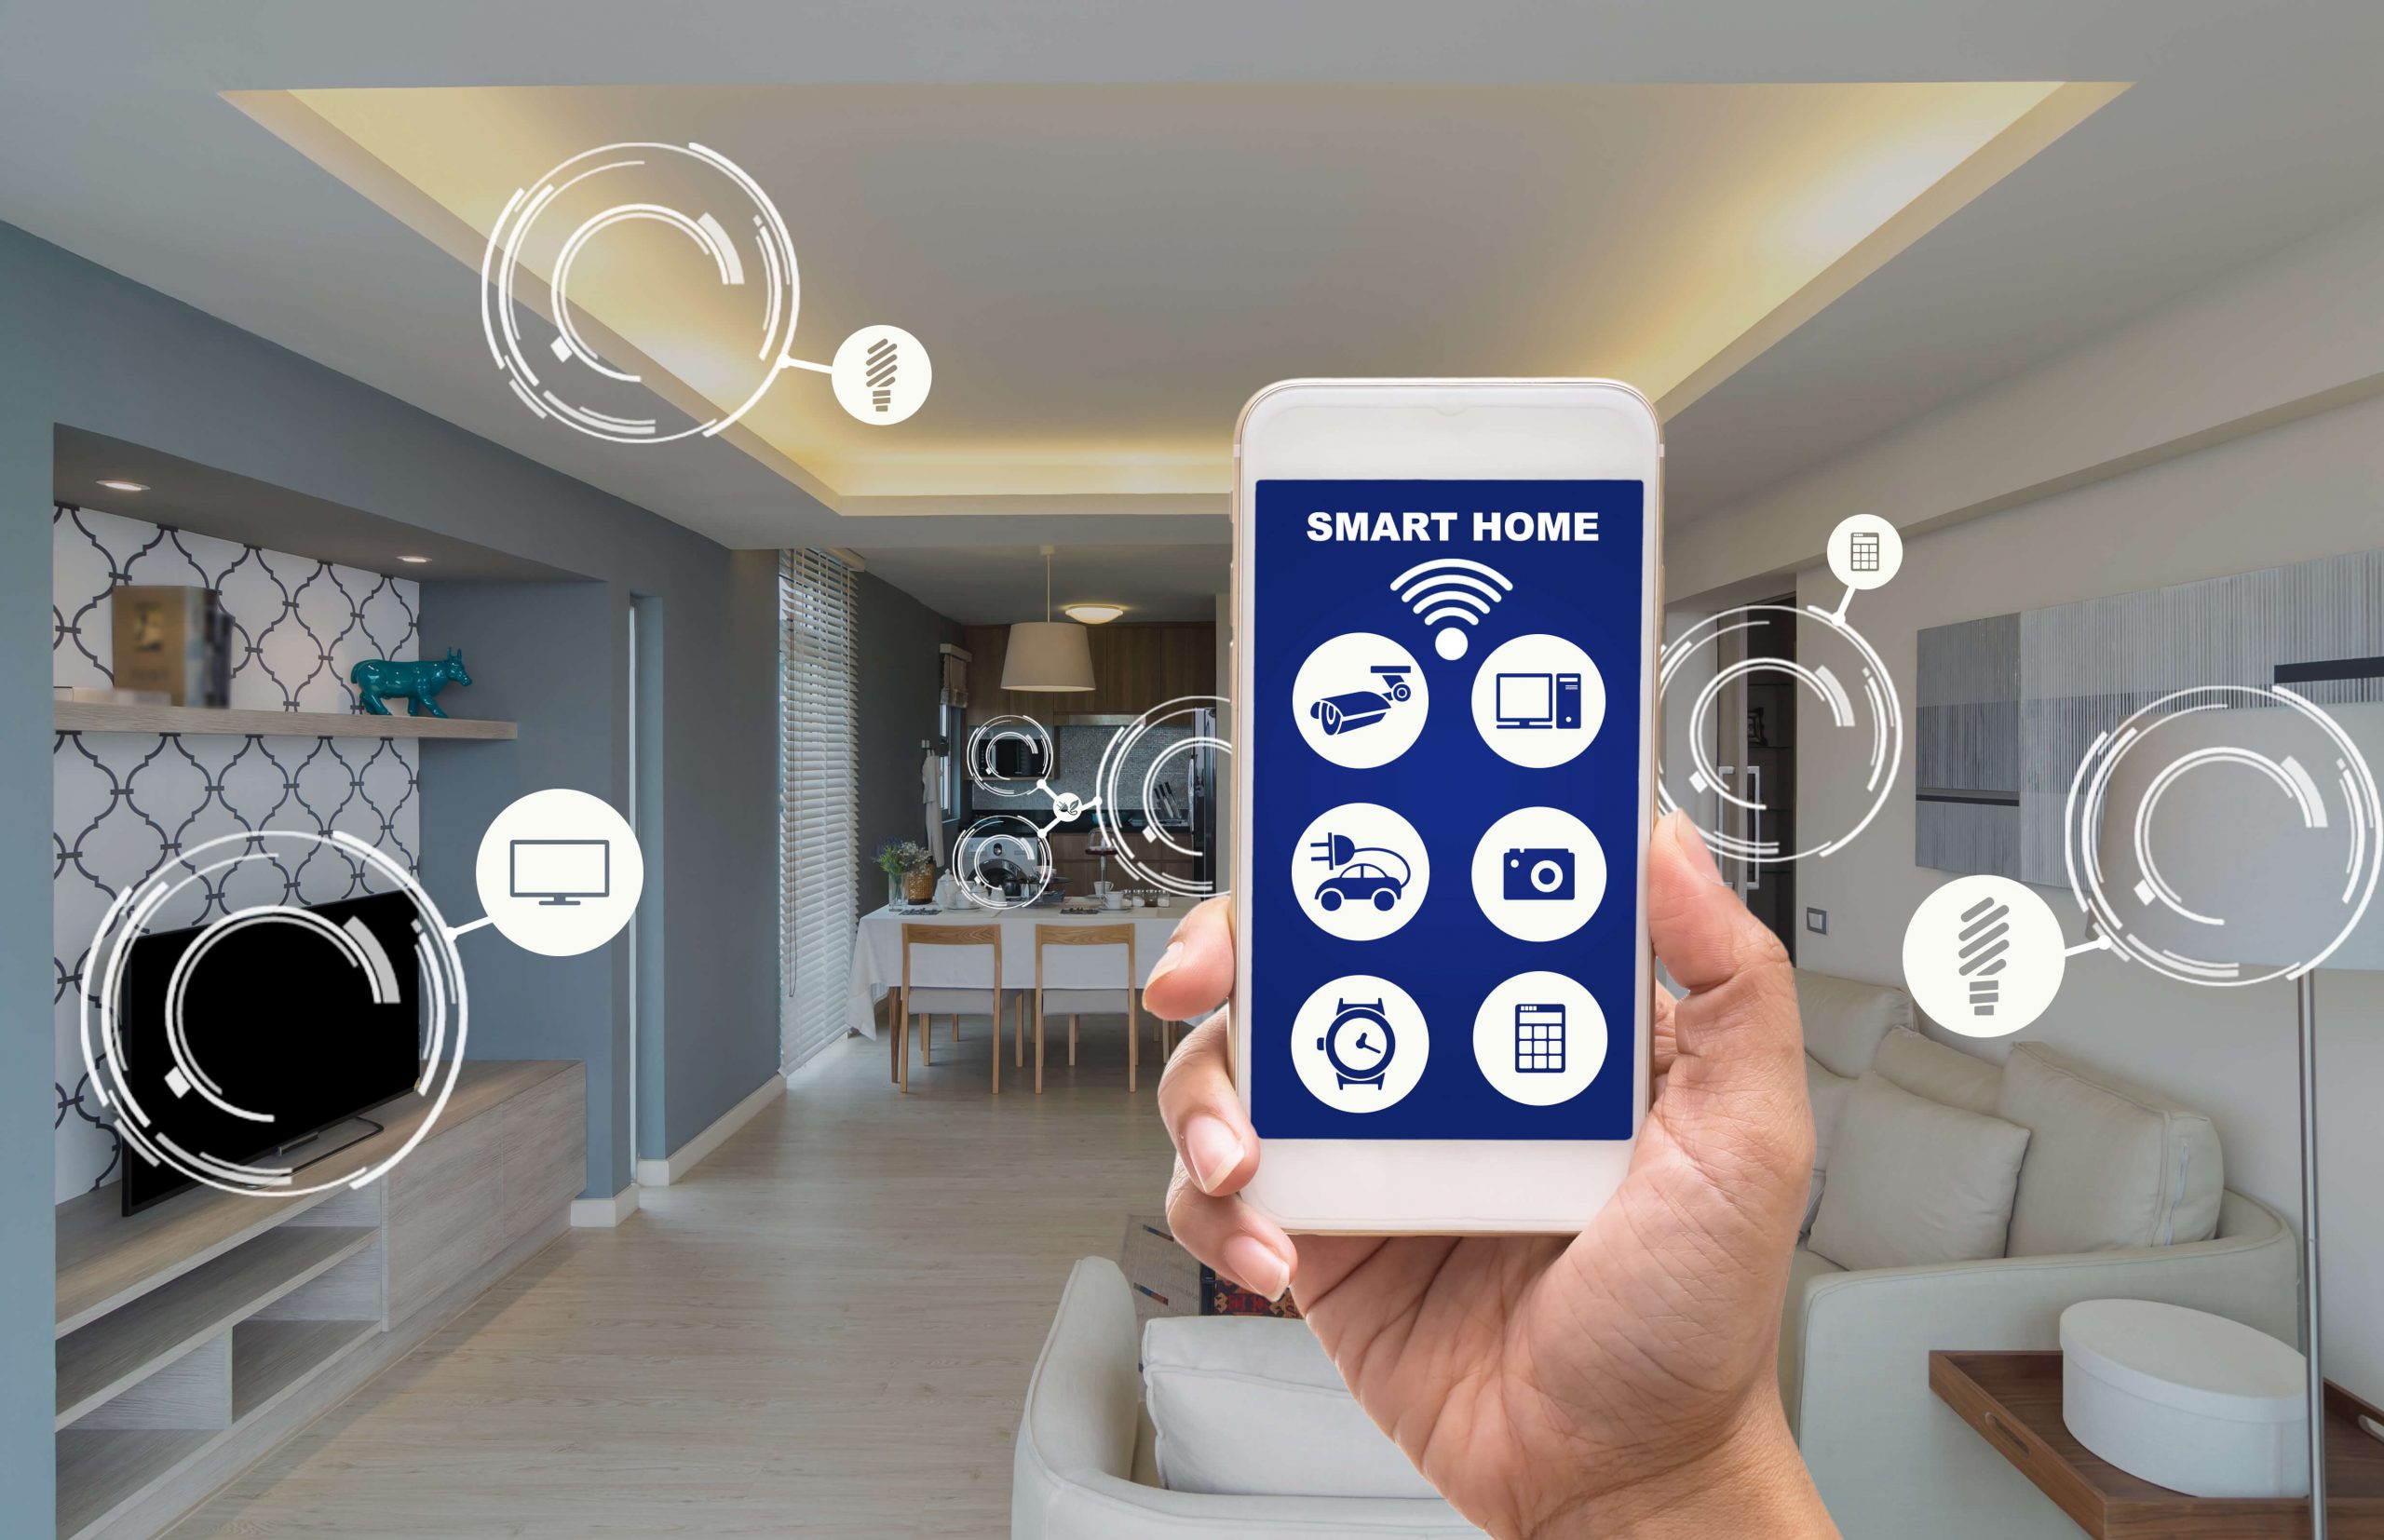 Smart Security Systems